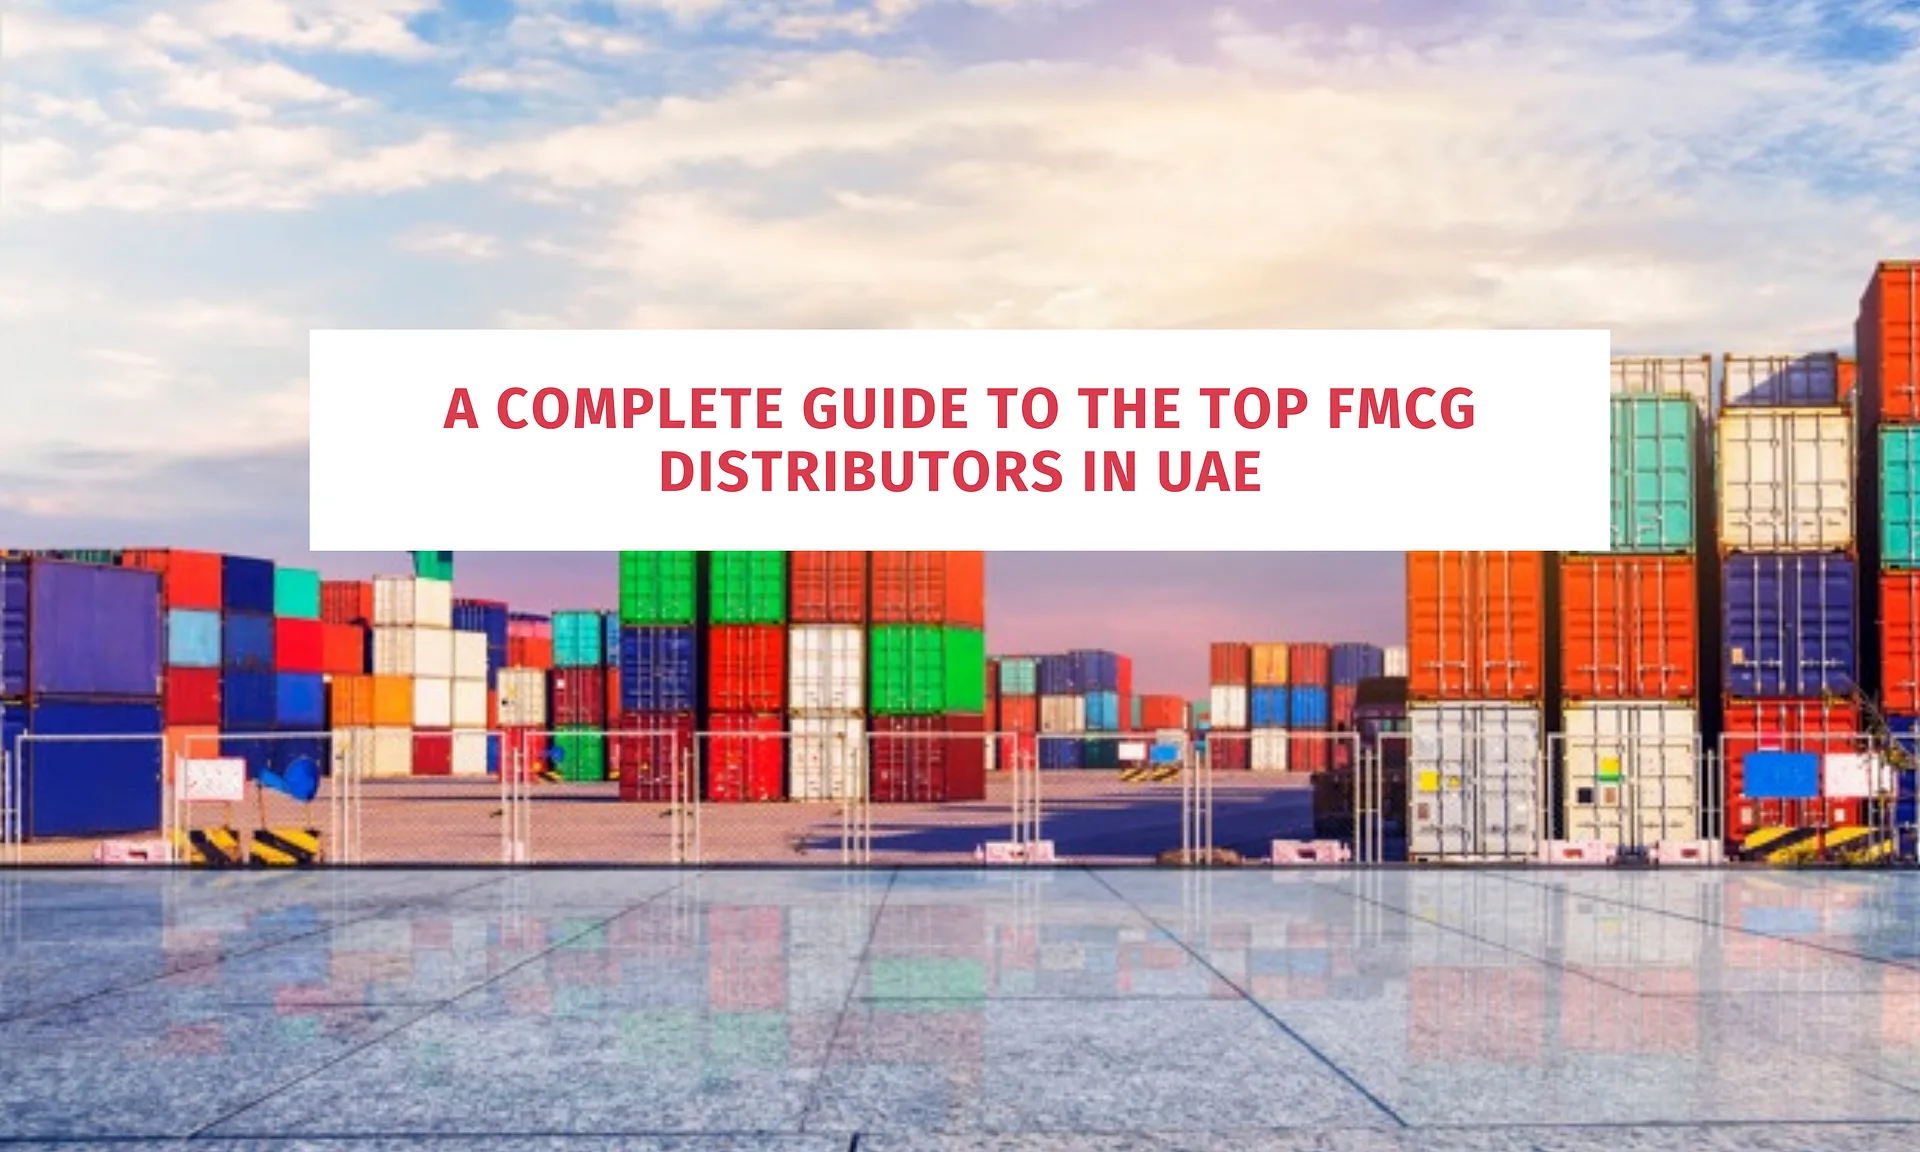 A Complete Guide to the Top FMCG Distributors in UAE